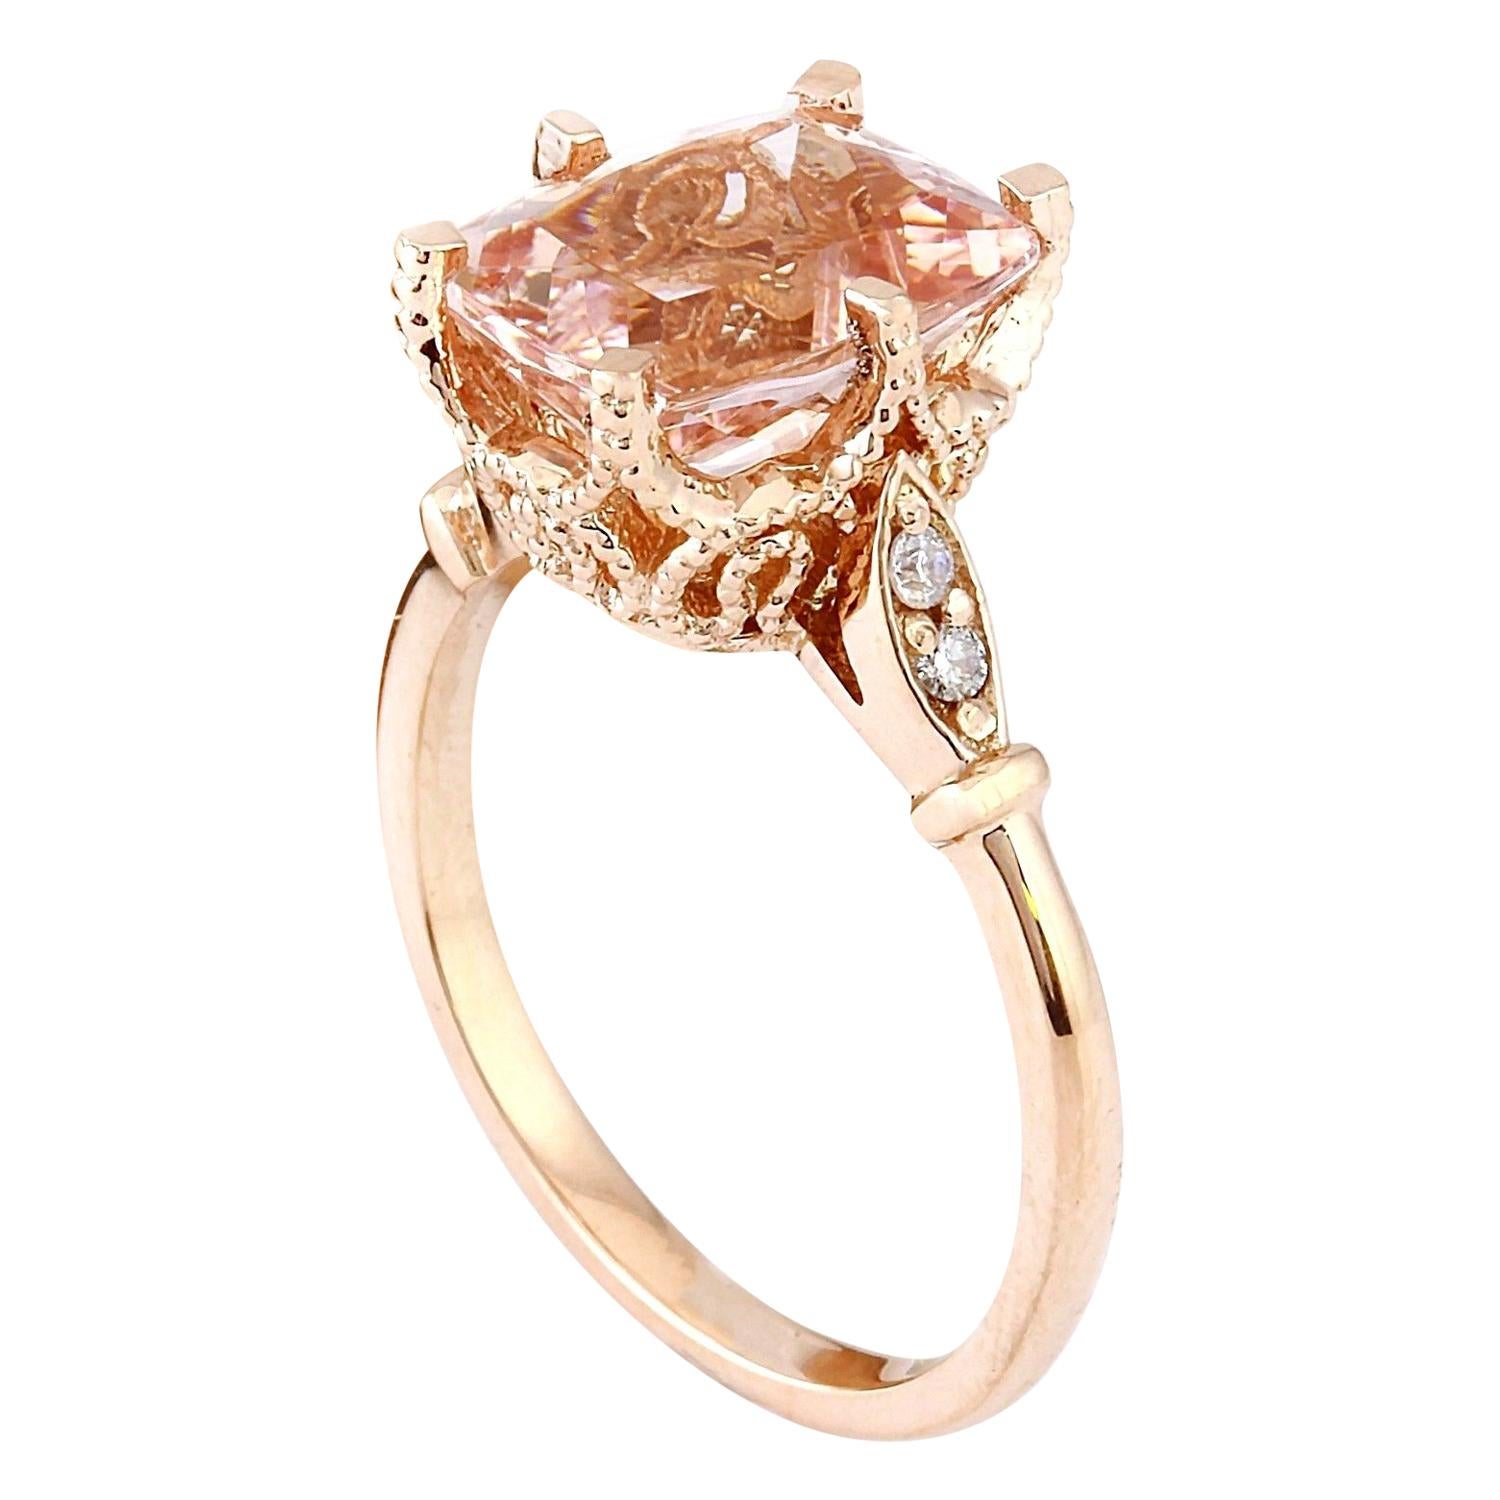 Cushion Cut Exquisite Natural Morganite Diamond Ring In 14 Karat Solid Rose Gold  For Sale